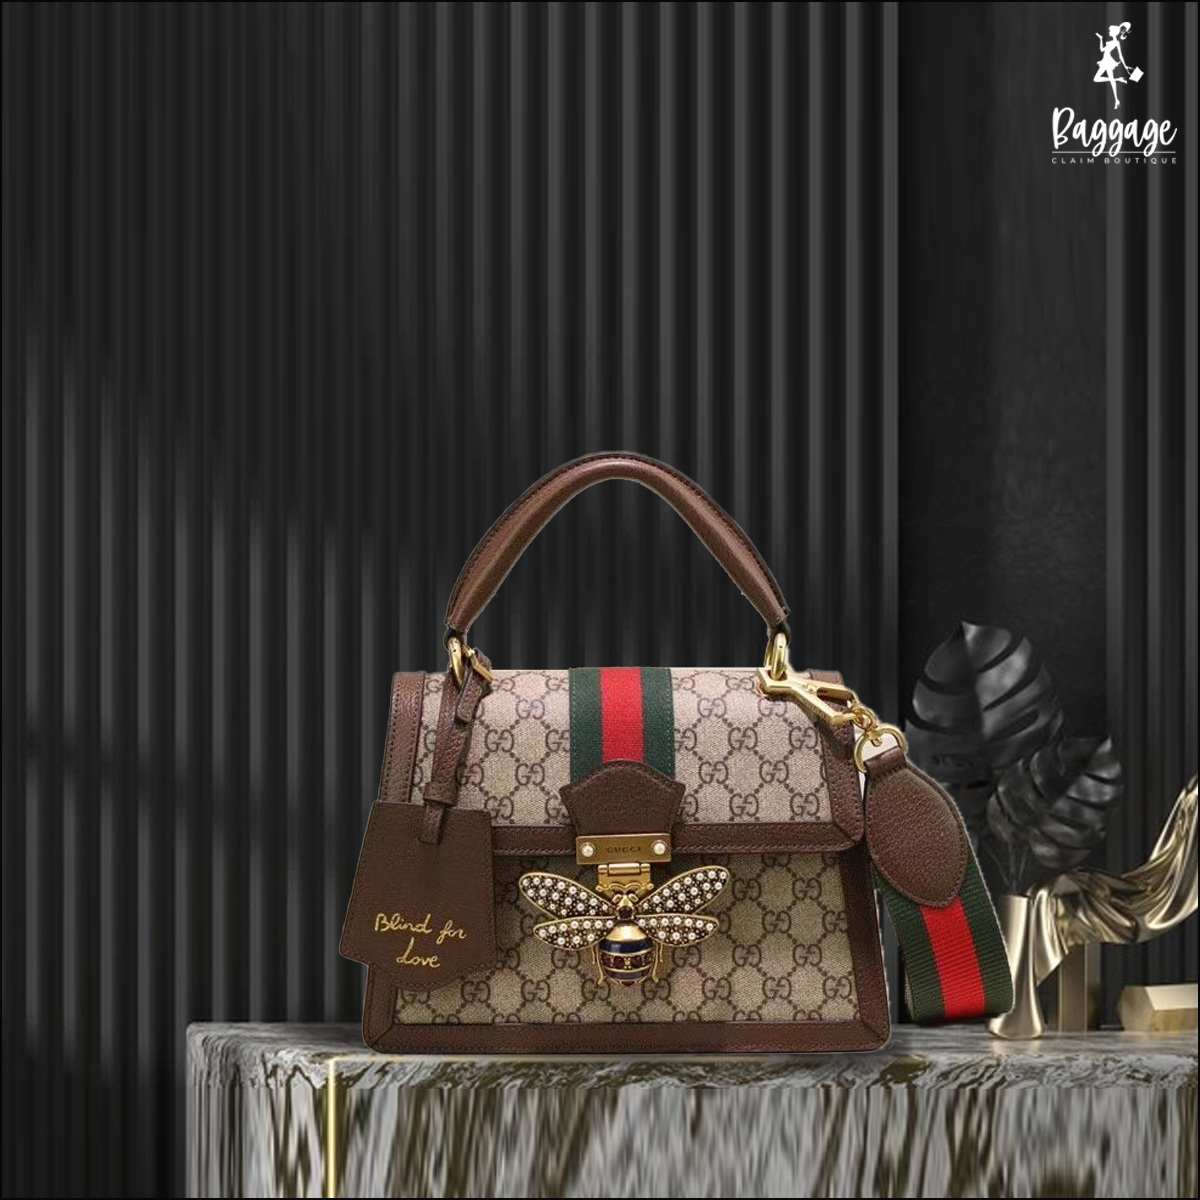 Baggage.Claim.Boutique on X: The Ultra Luxurious Queen Margaret